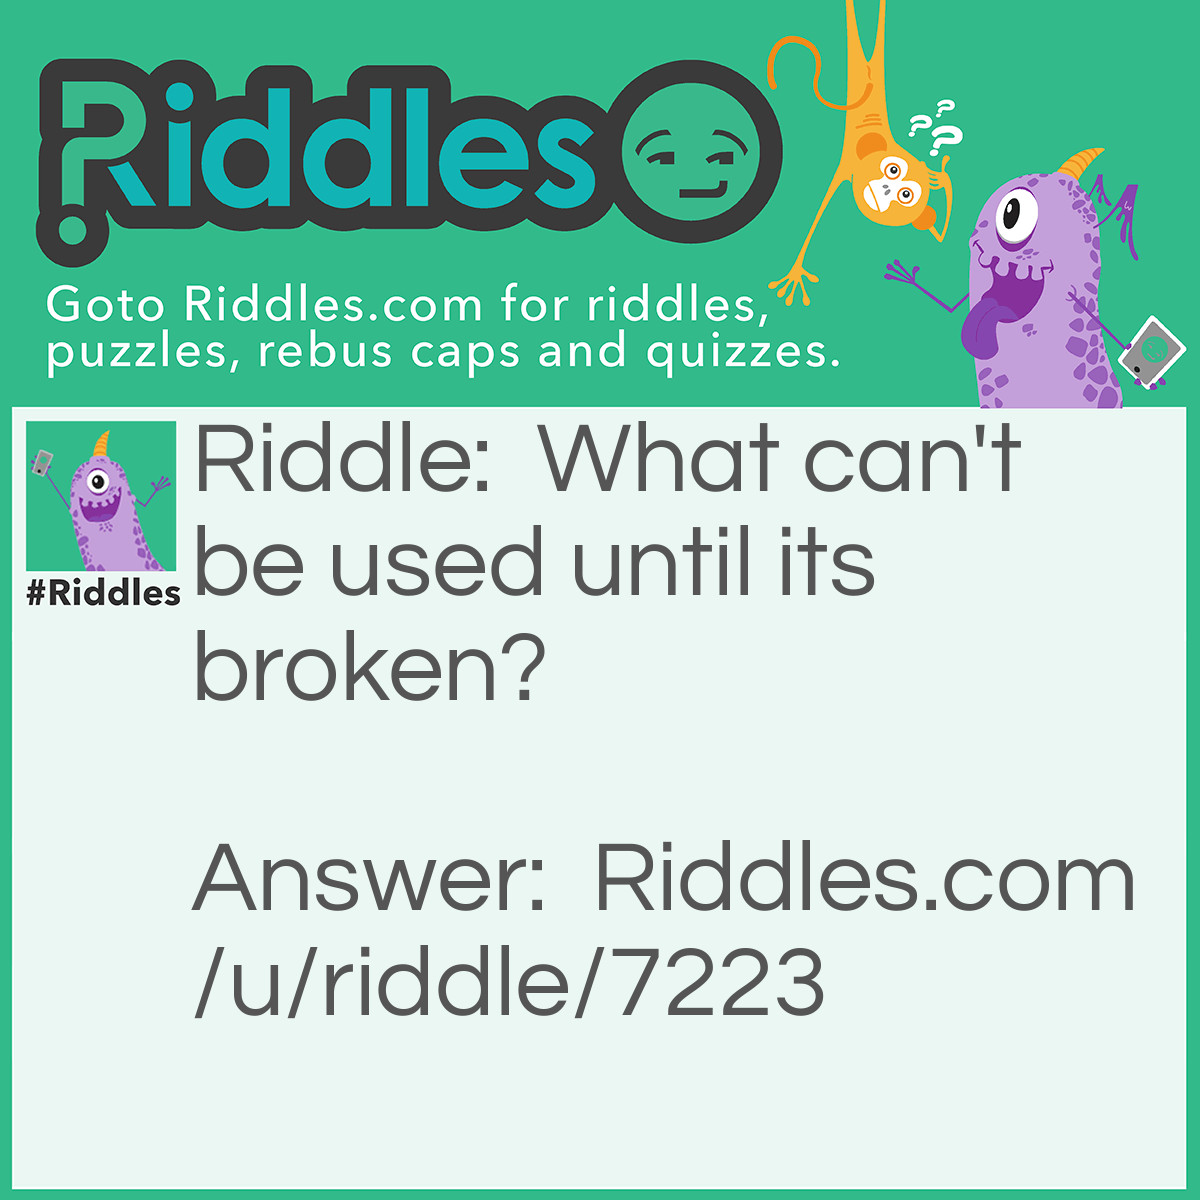 Riddle: What can't be used until its broken? Answer: An Egg.